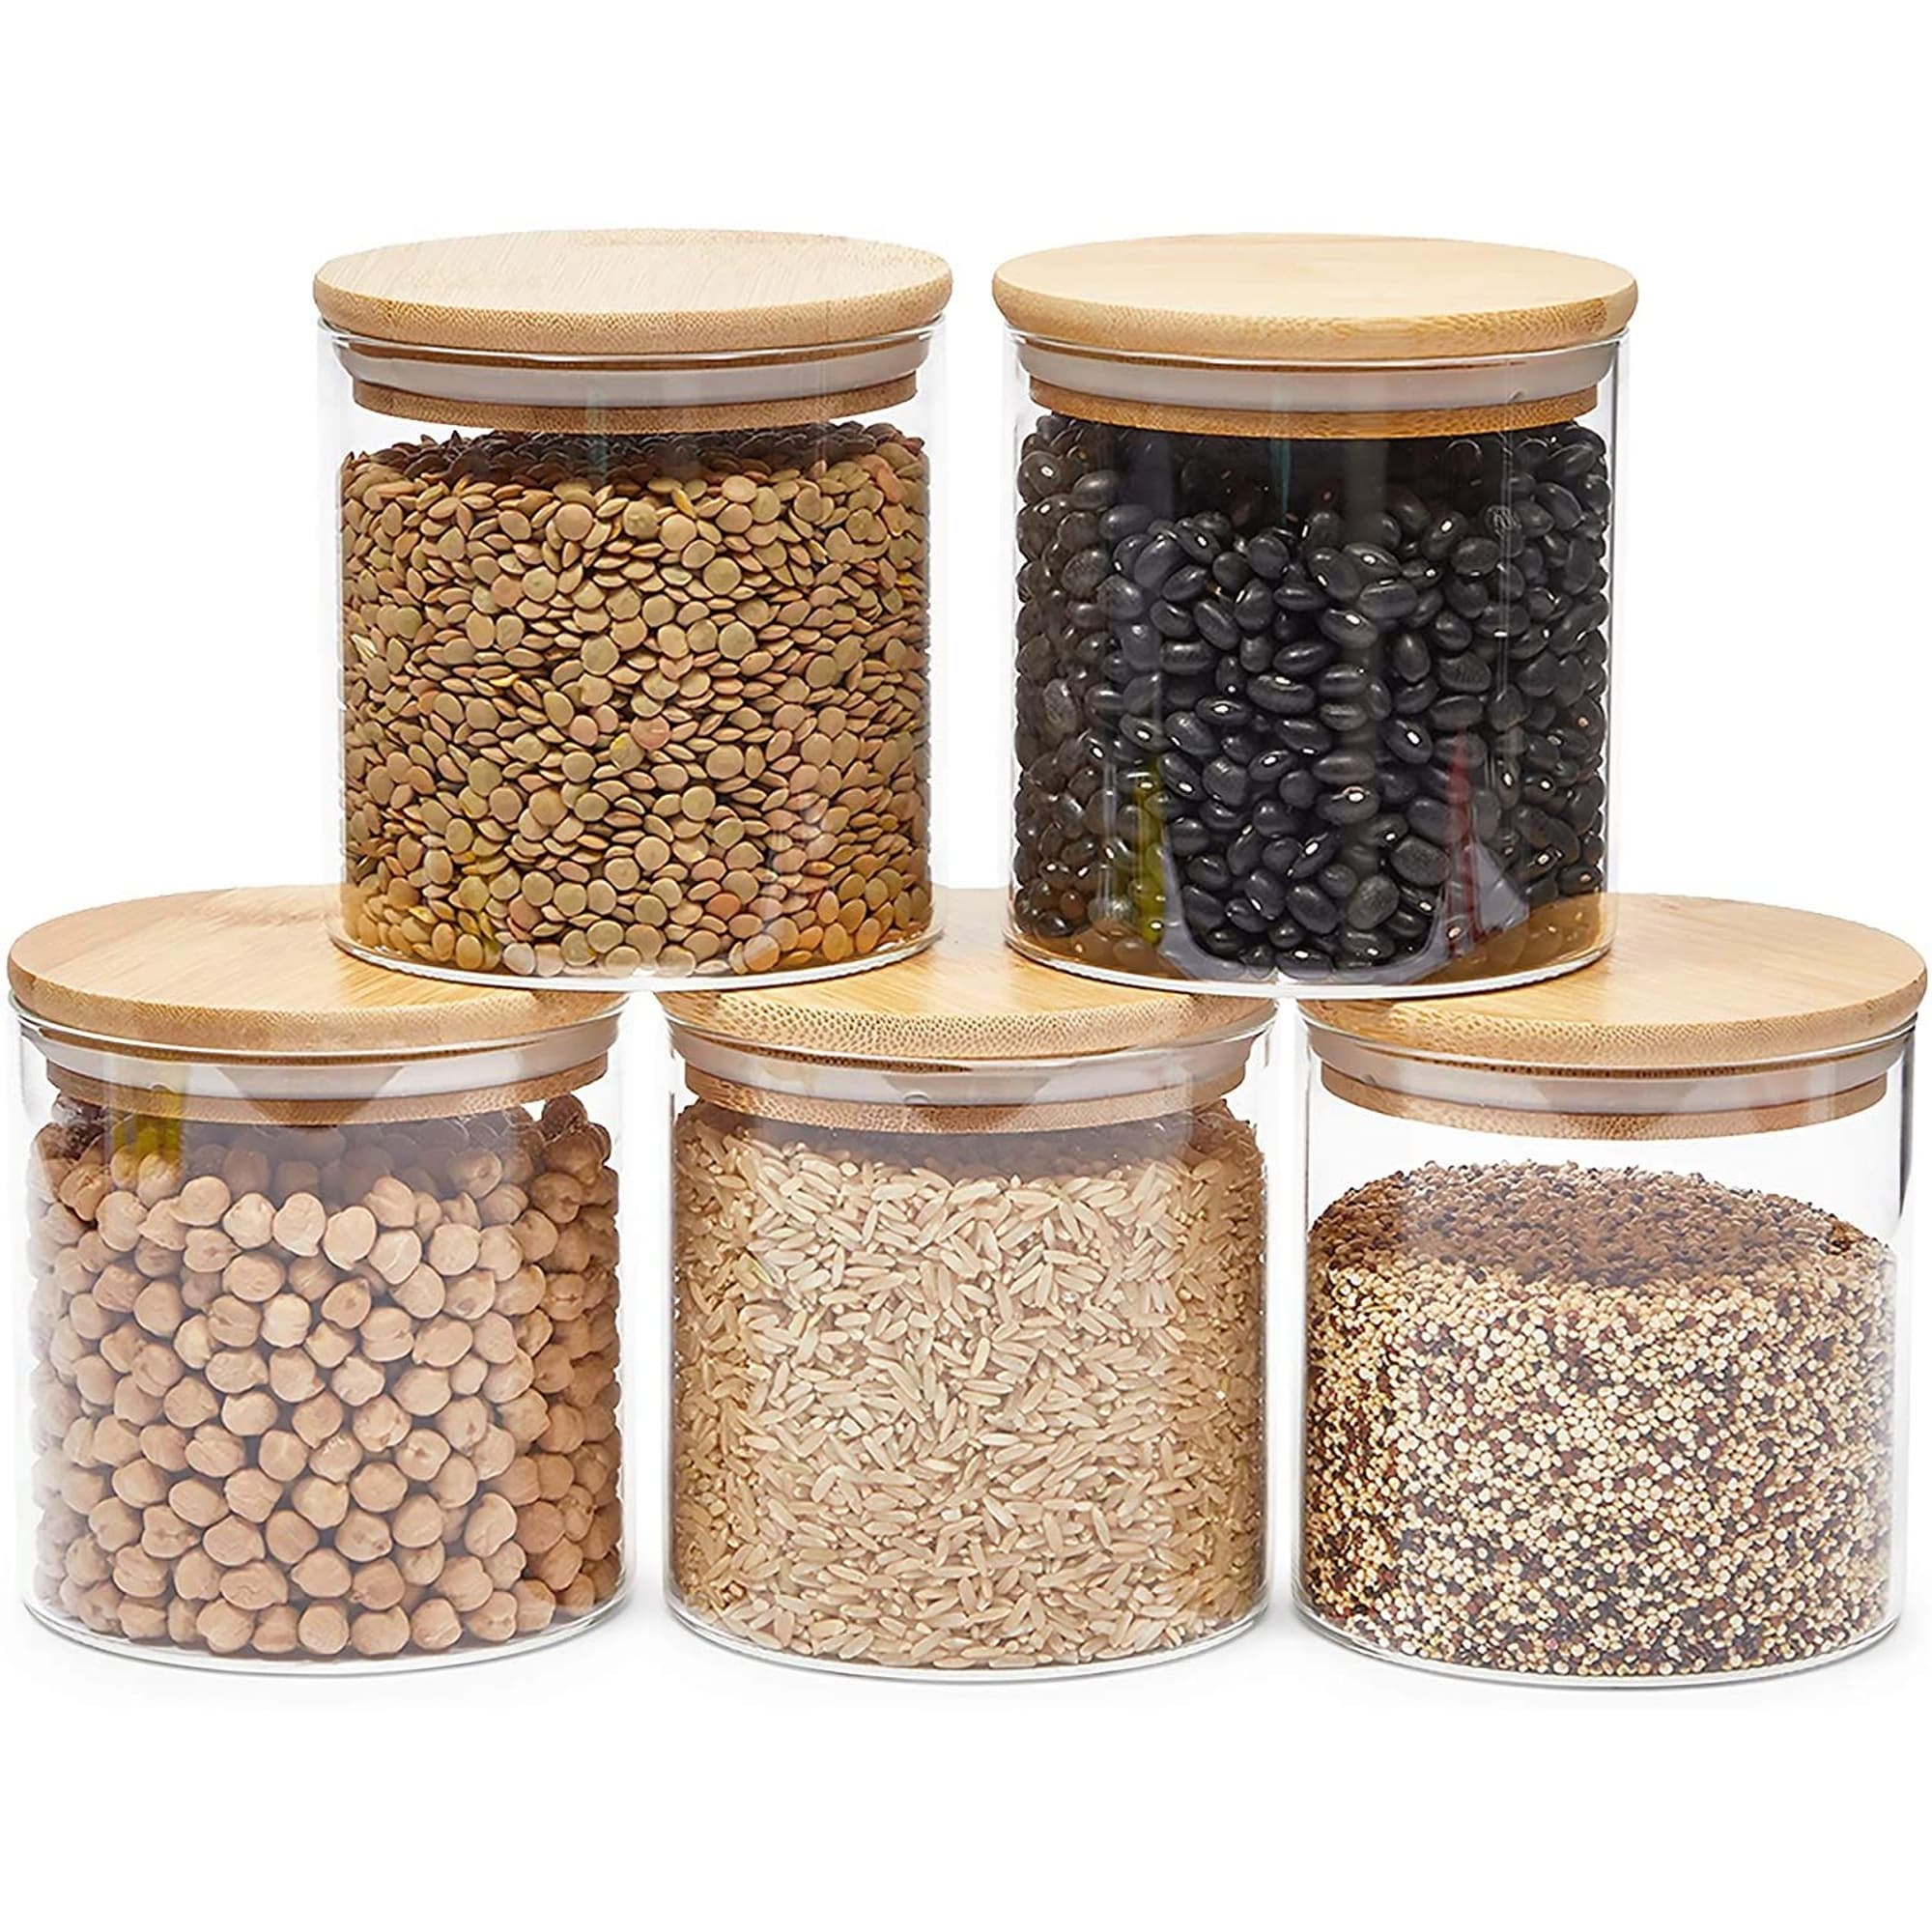 Set of 5 Glass Storage Containers with Bamboo Lids, Airtight